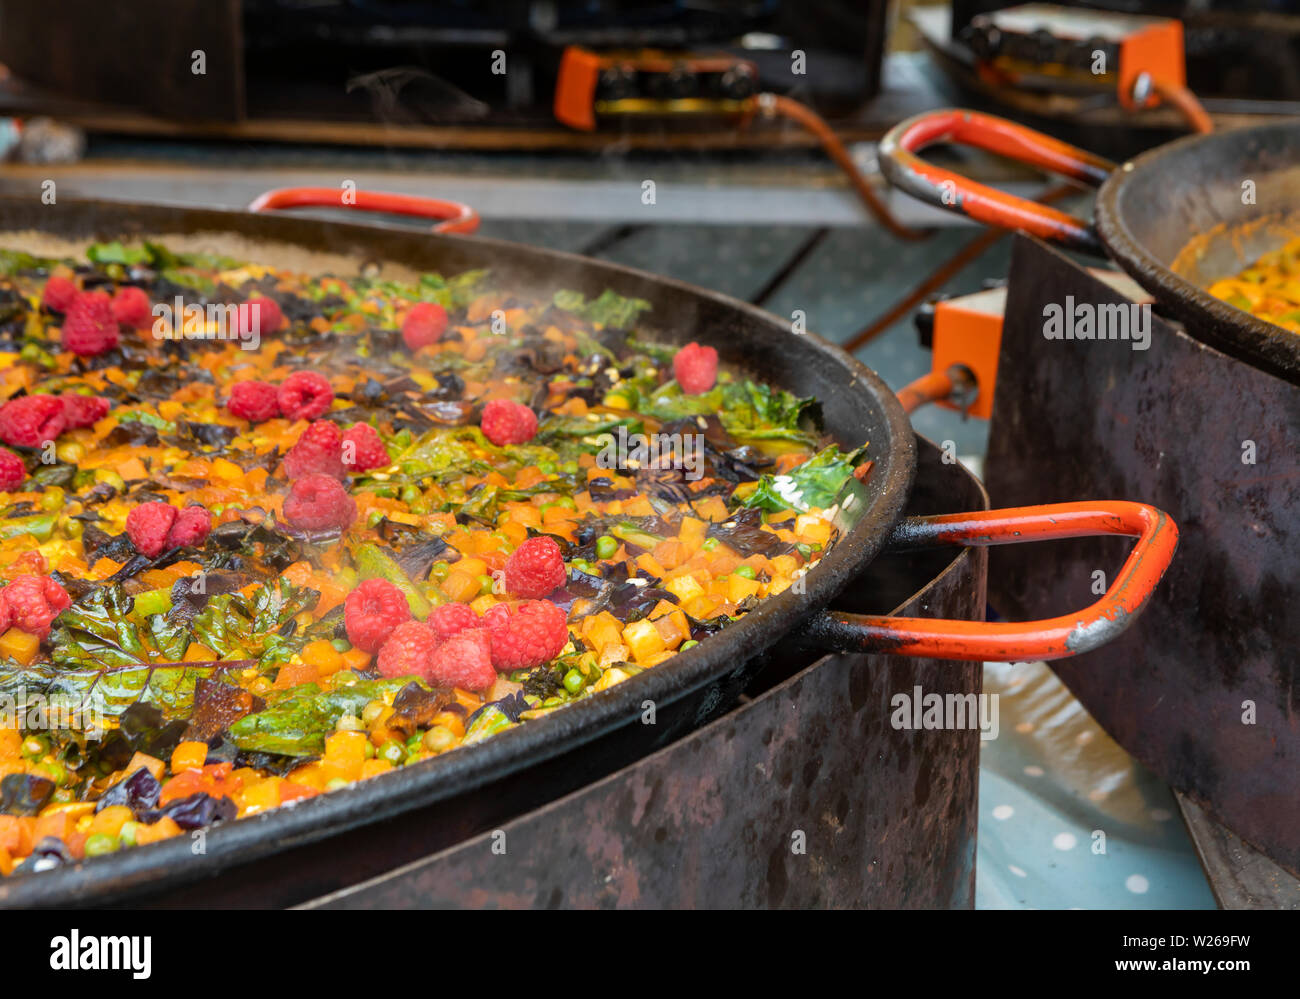 https://c8.alamy.com/comp/W269FW/paella-is-cooking-in-a-a-big-gas-cooker-and-steam-is-bubbling-W269FW.jpg